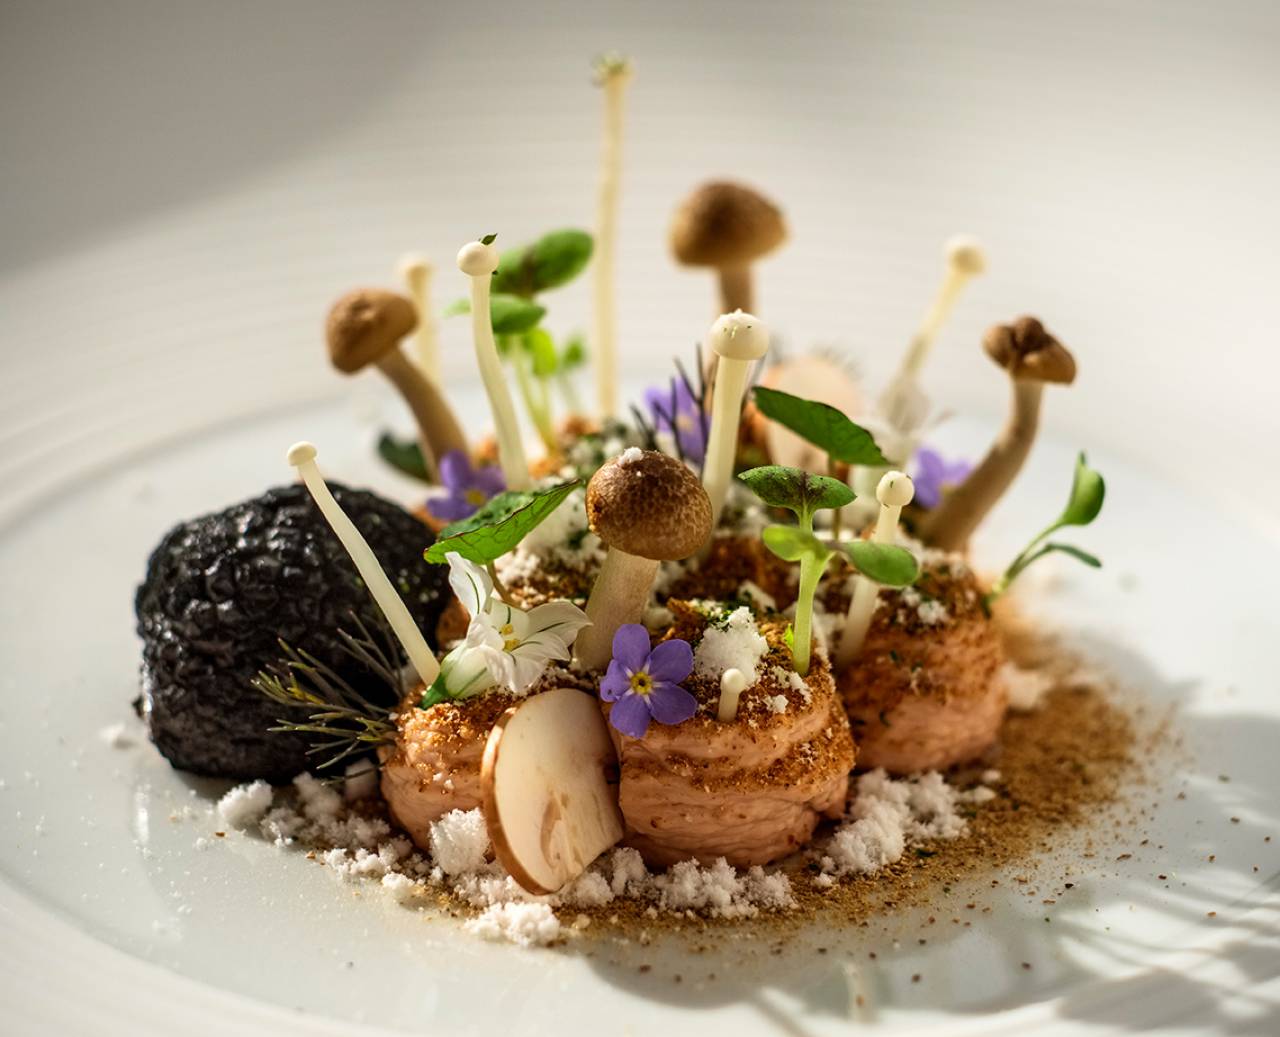 Dishes from the Apicius restaurant